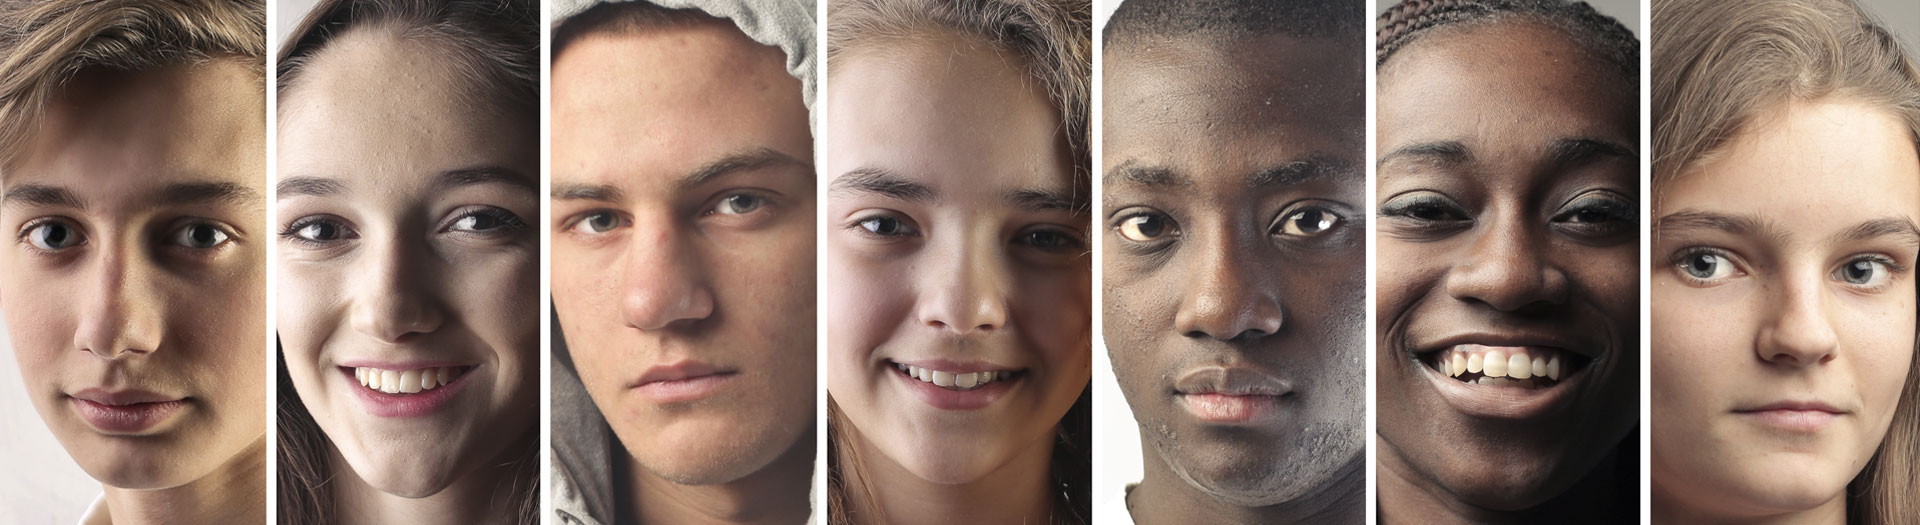 A series of portraits of six diverse young individuals shown from the shoulders up, each with a different expression, arranged side by side.